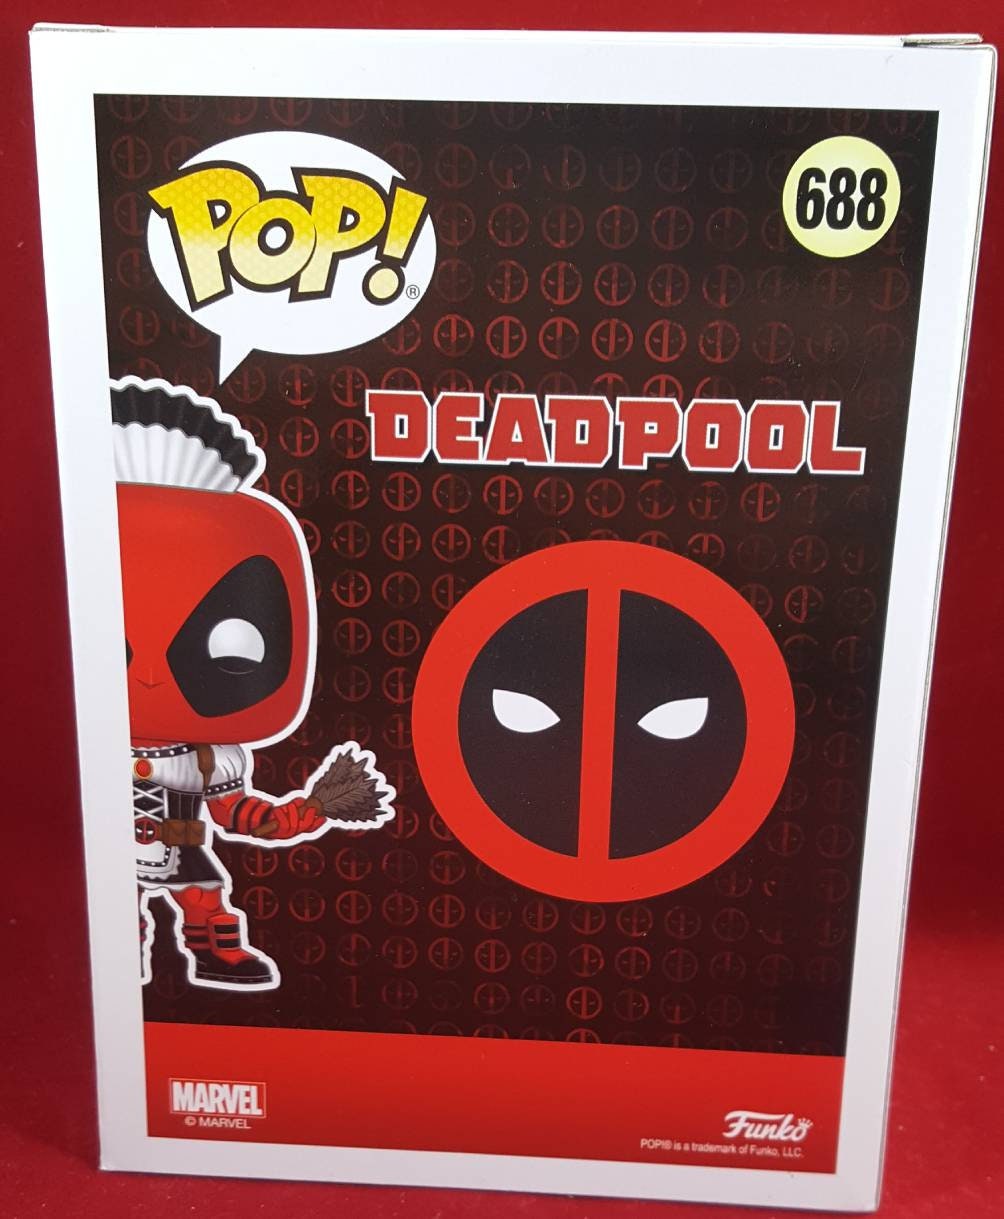 Deadpool French Maid Funko Pop! #688 - The Pop Central